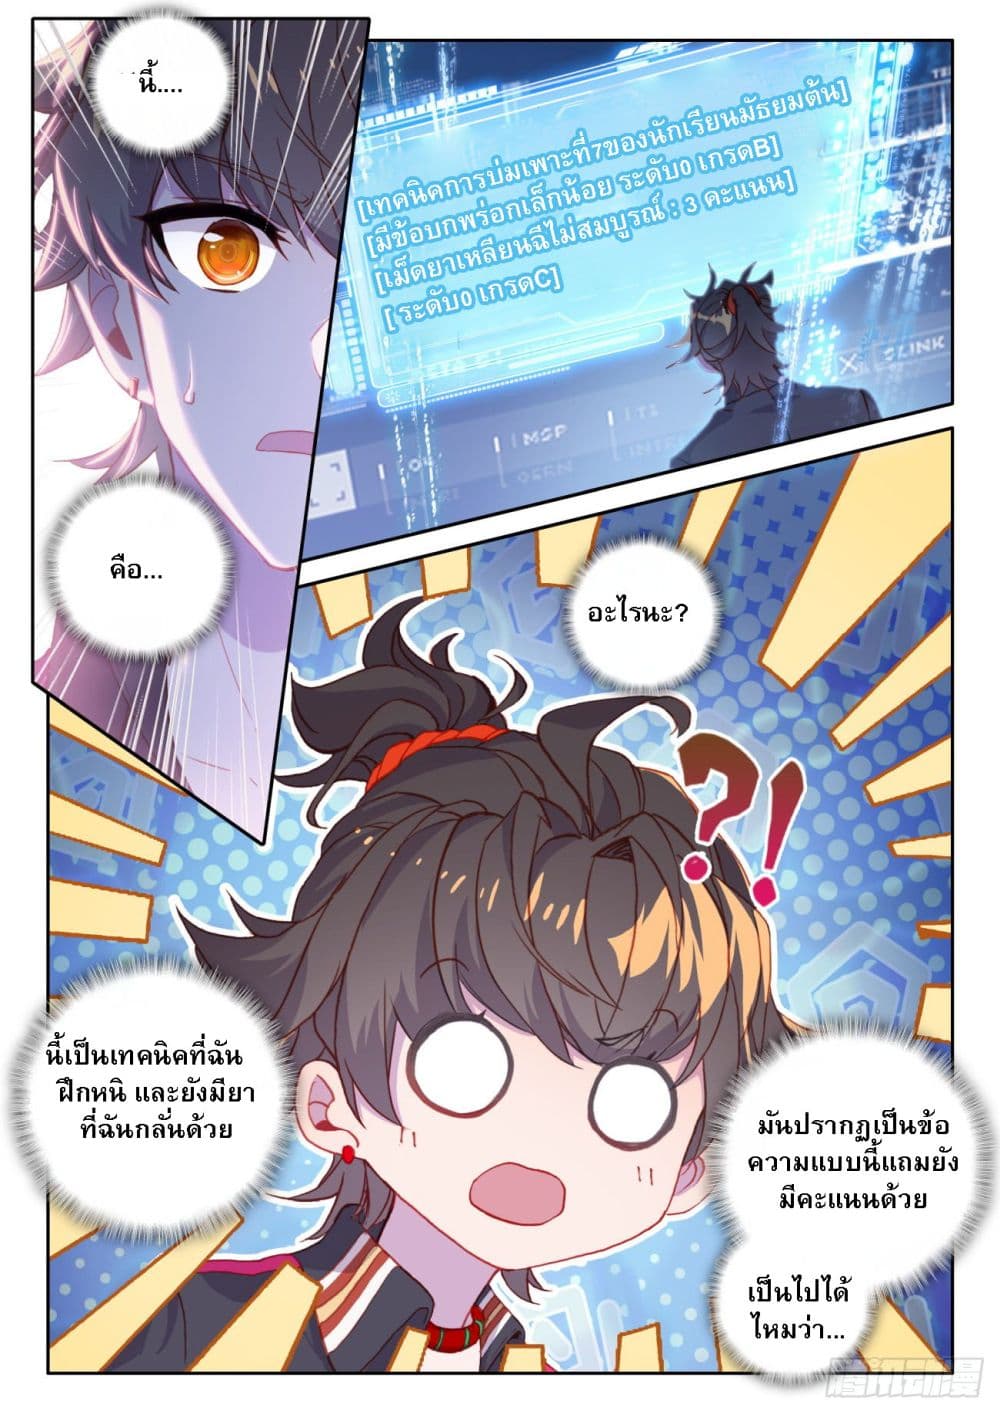 Becoming Immortal by Paying Cash ตอนที่ 2 (6)